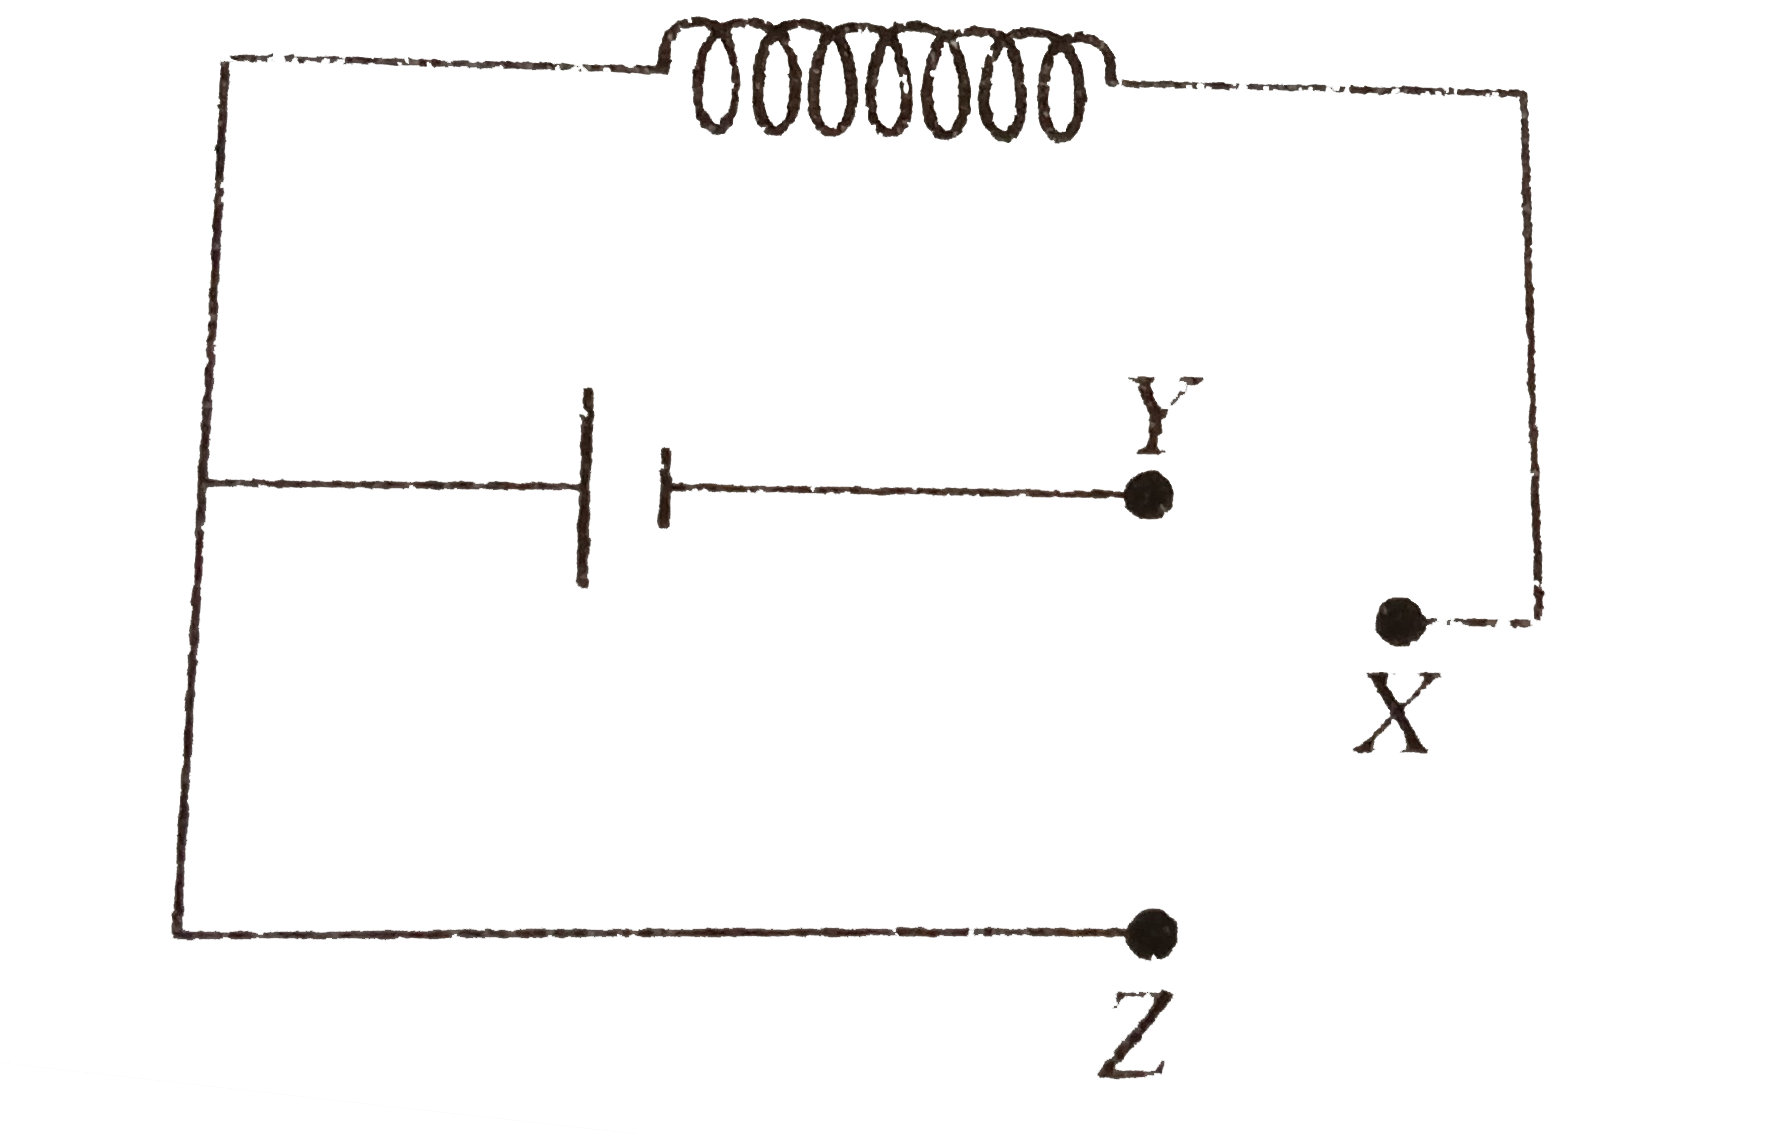 In the circuit shown, the coil has inductance and resistance. When X is joined to Y, the time constant is tau during growth of current. When the steady state is reached, then heat is produced in the coil at a rate P. If X is now joined to Z, then choose the correct statement.